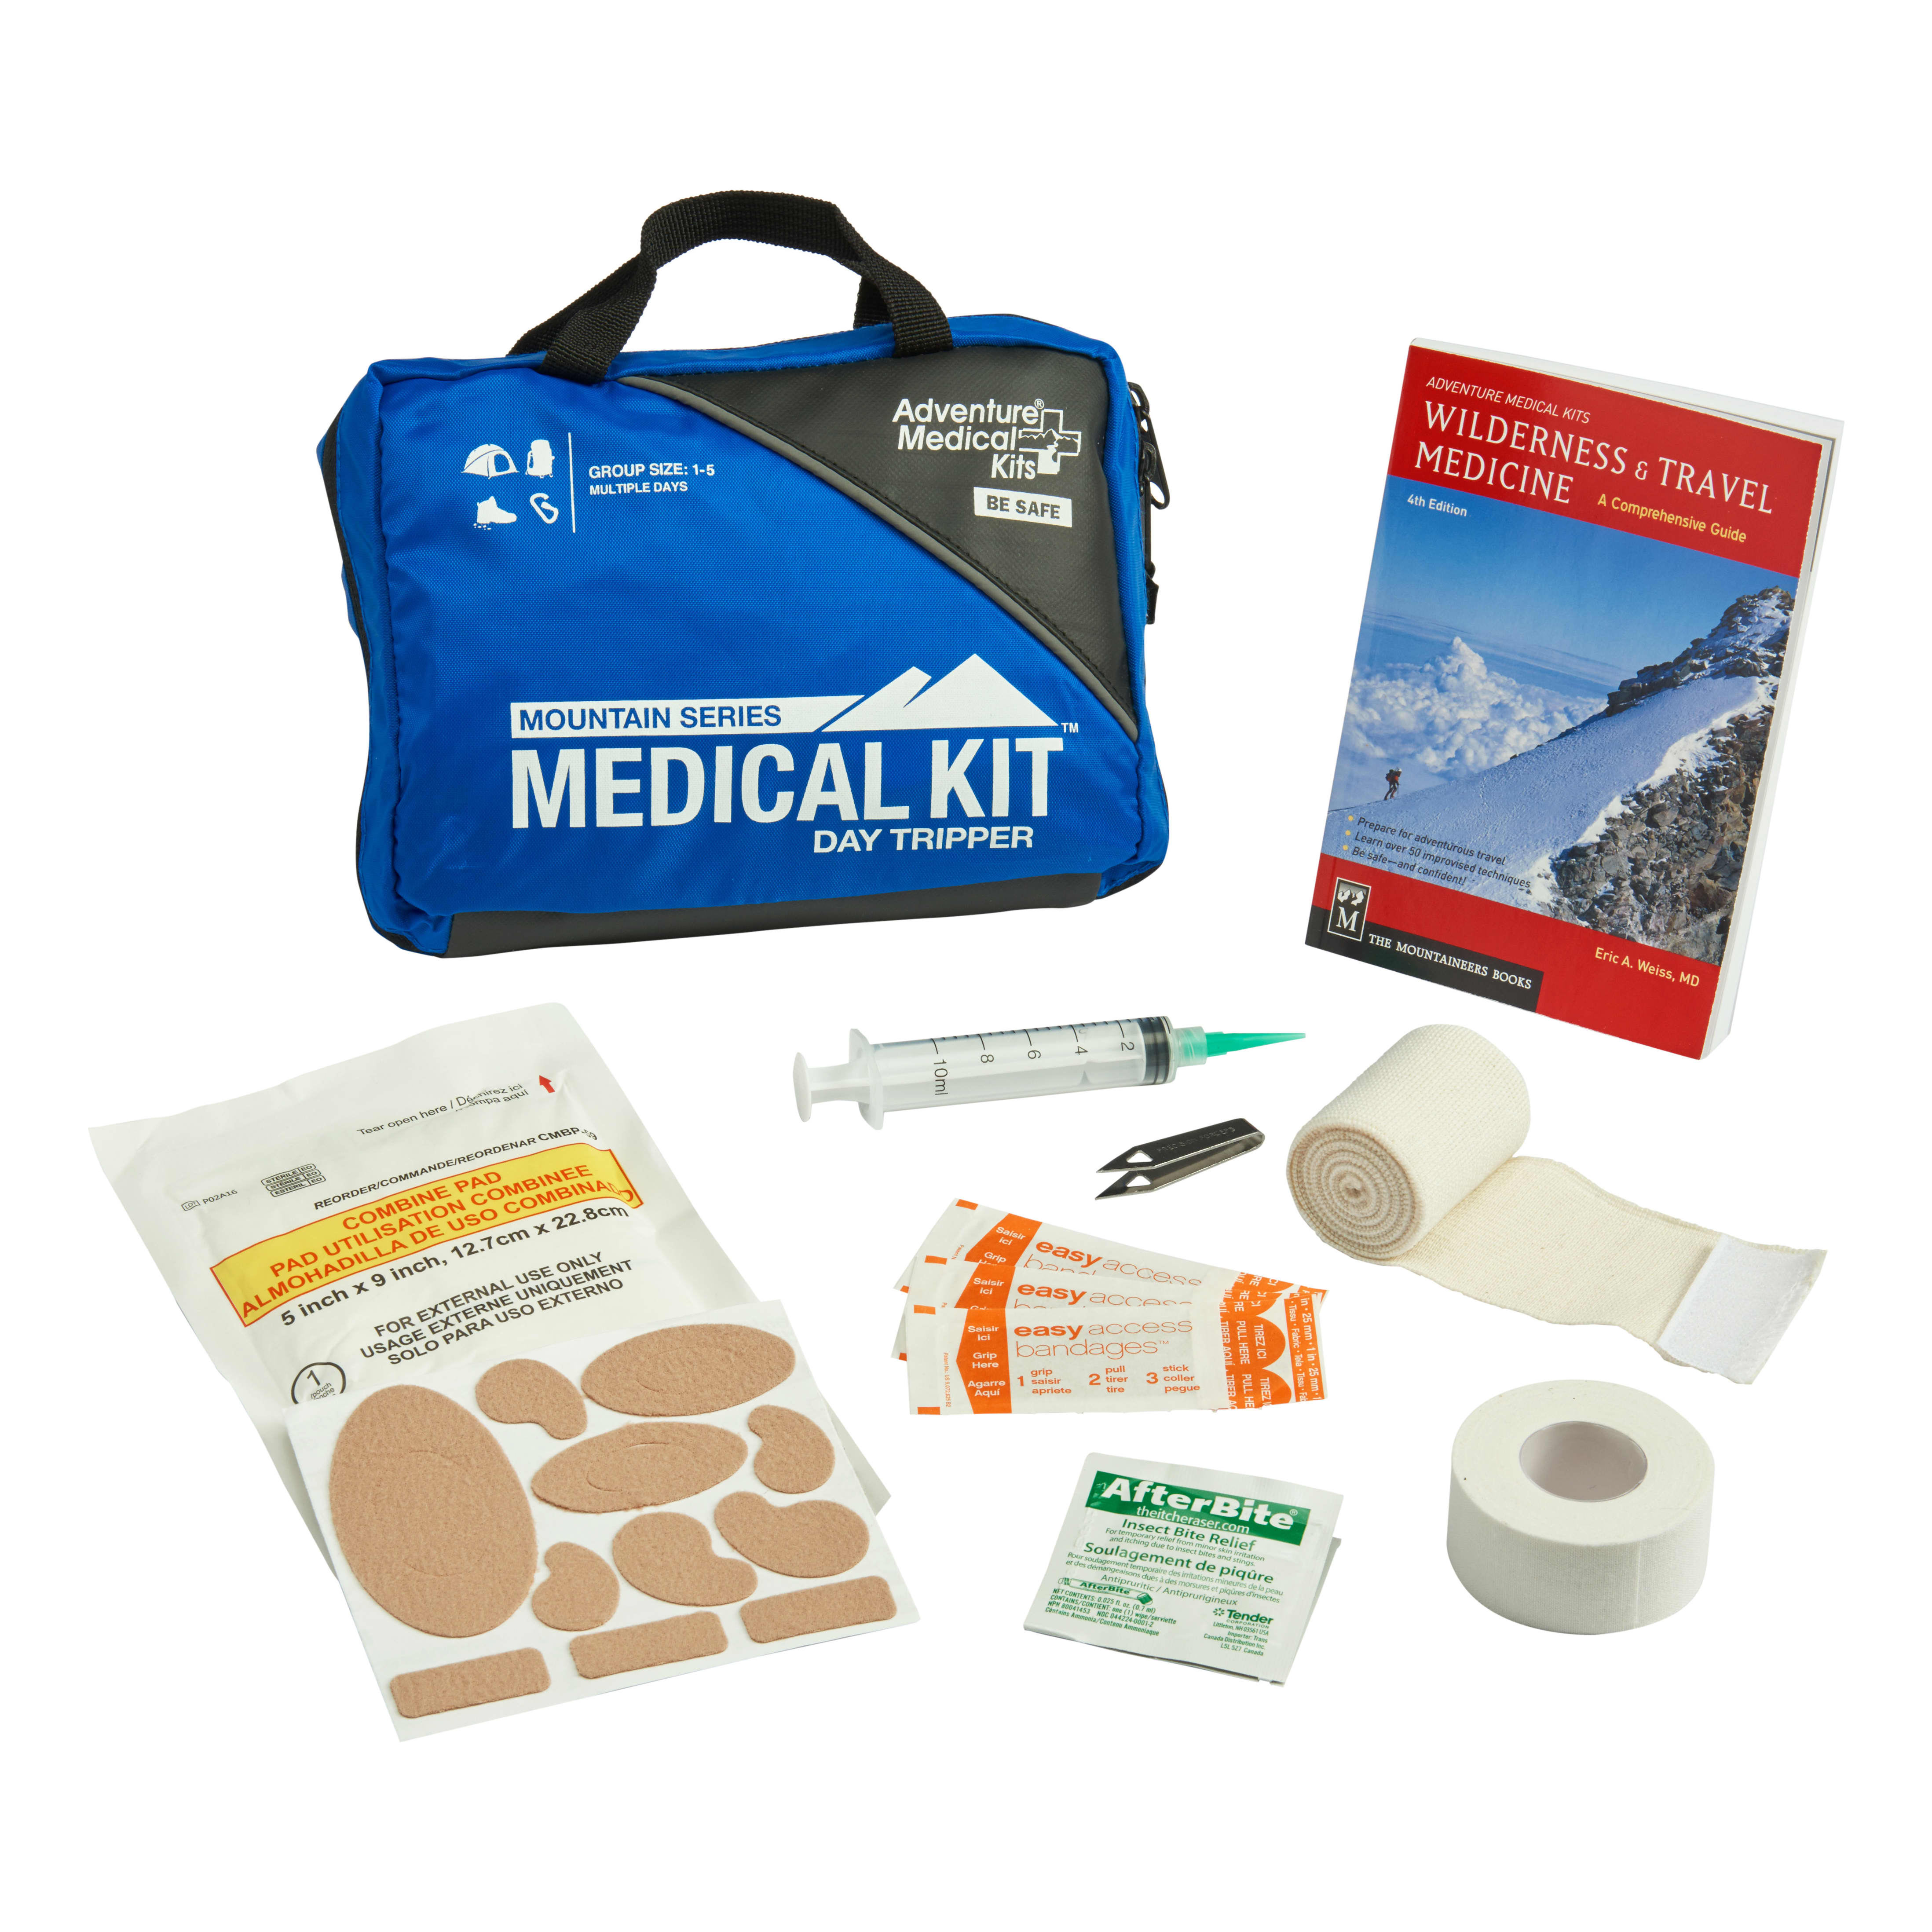 Adventure Medical Kits® Mountain Series Day Tripper Medical Kit - Contents View